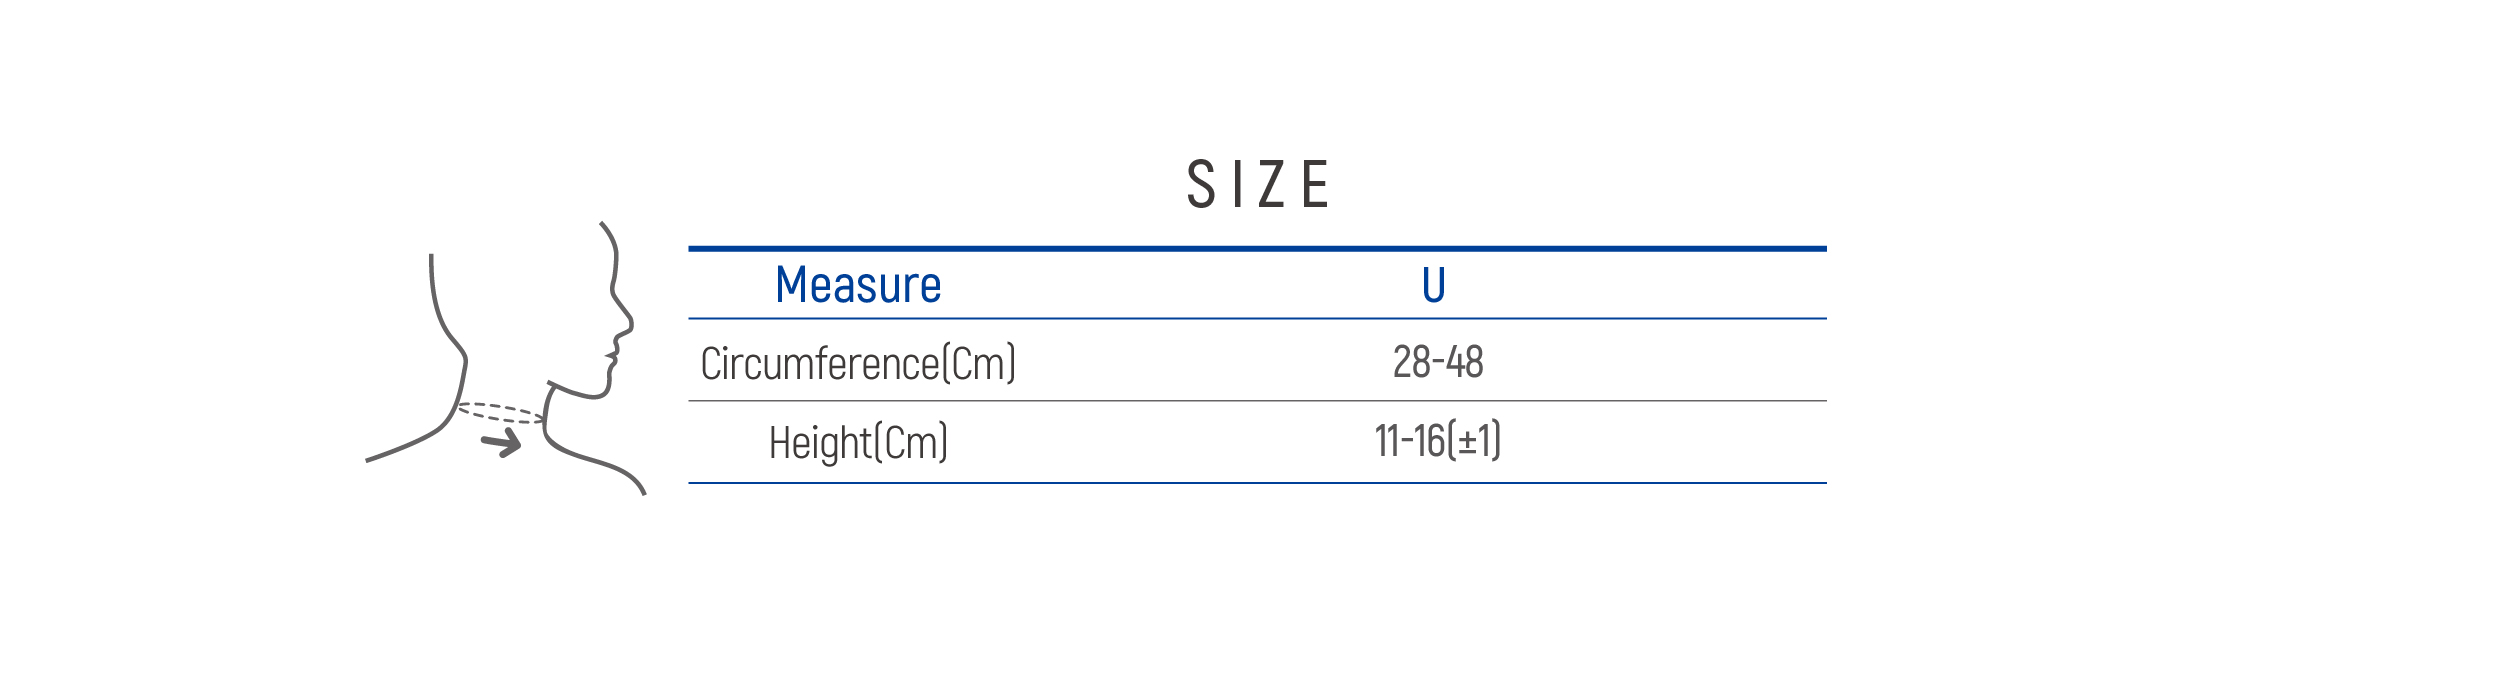 DR-C130 Size table image